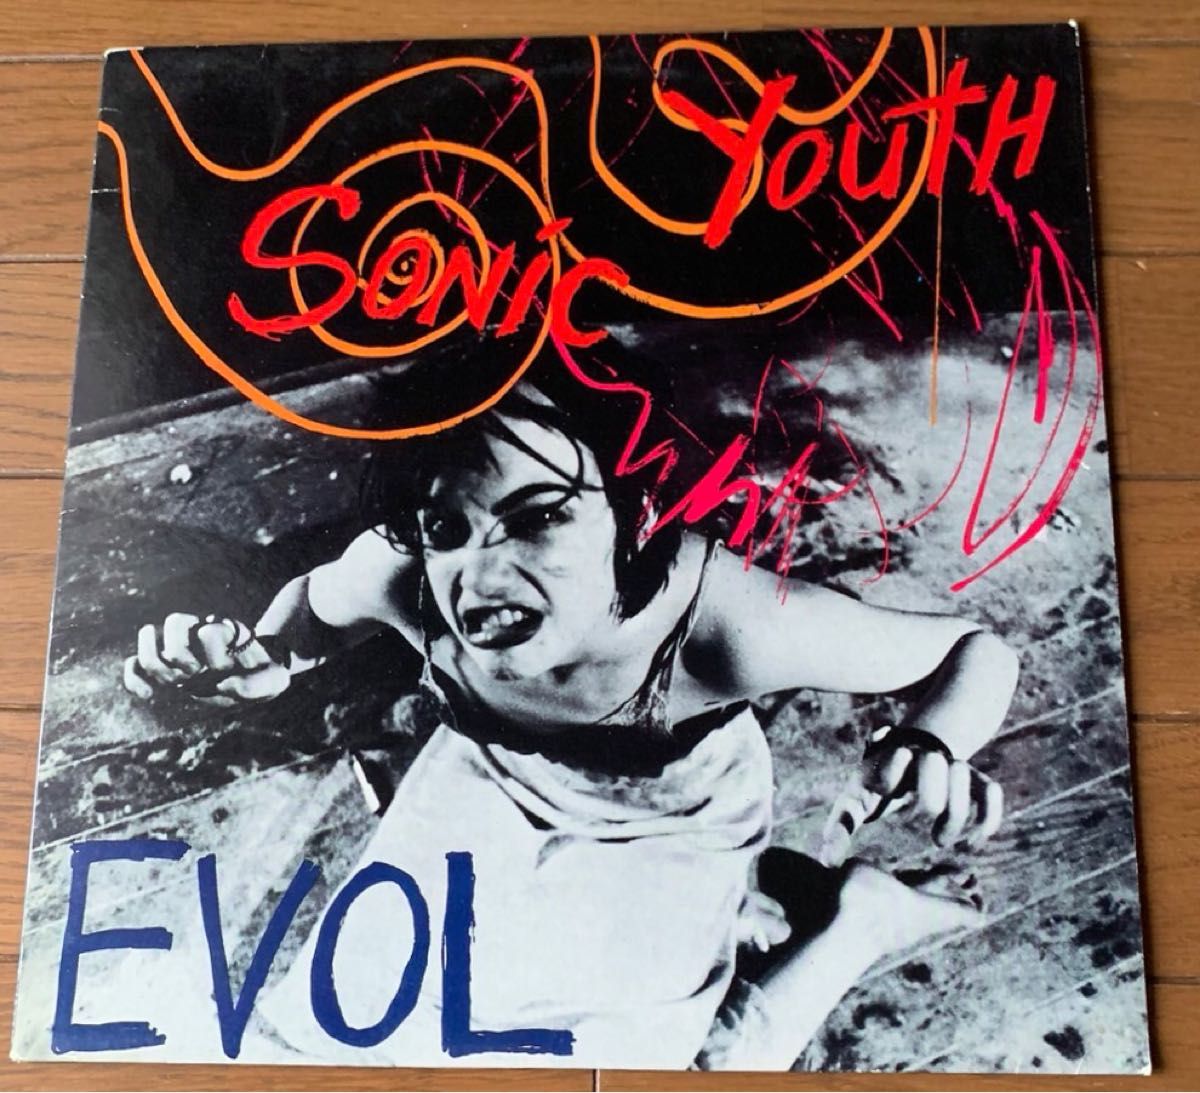 Sonic youth record EVOL